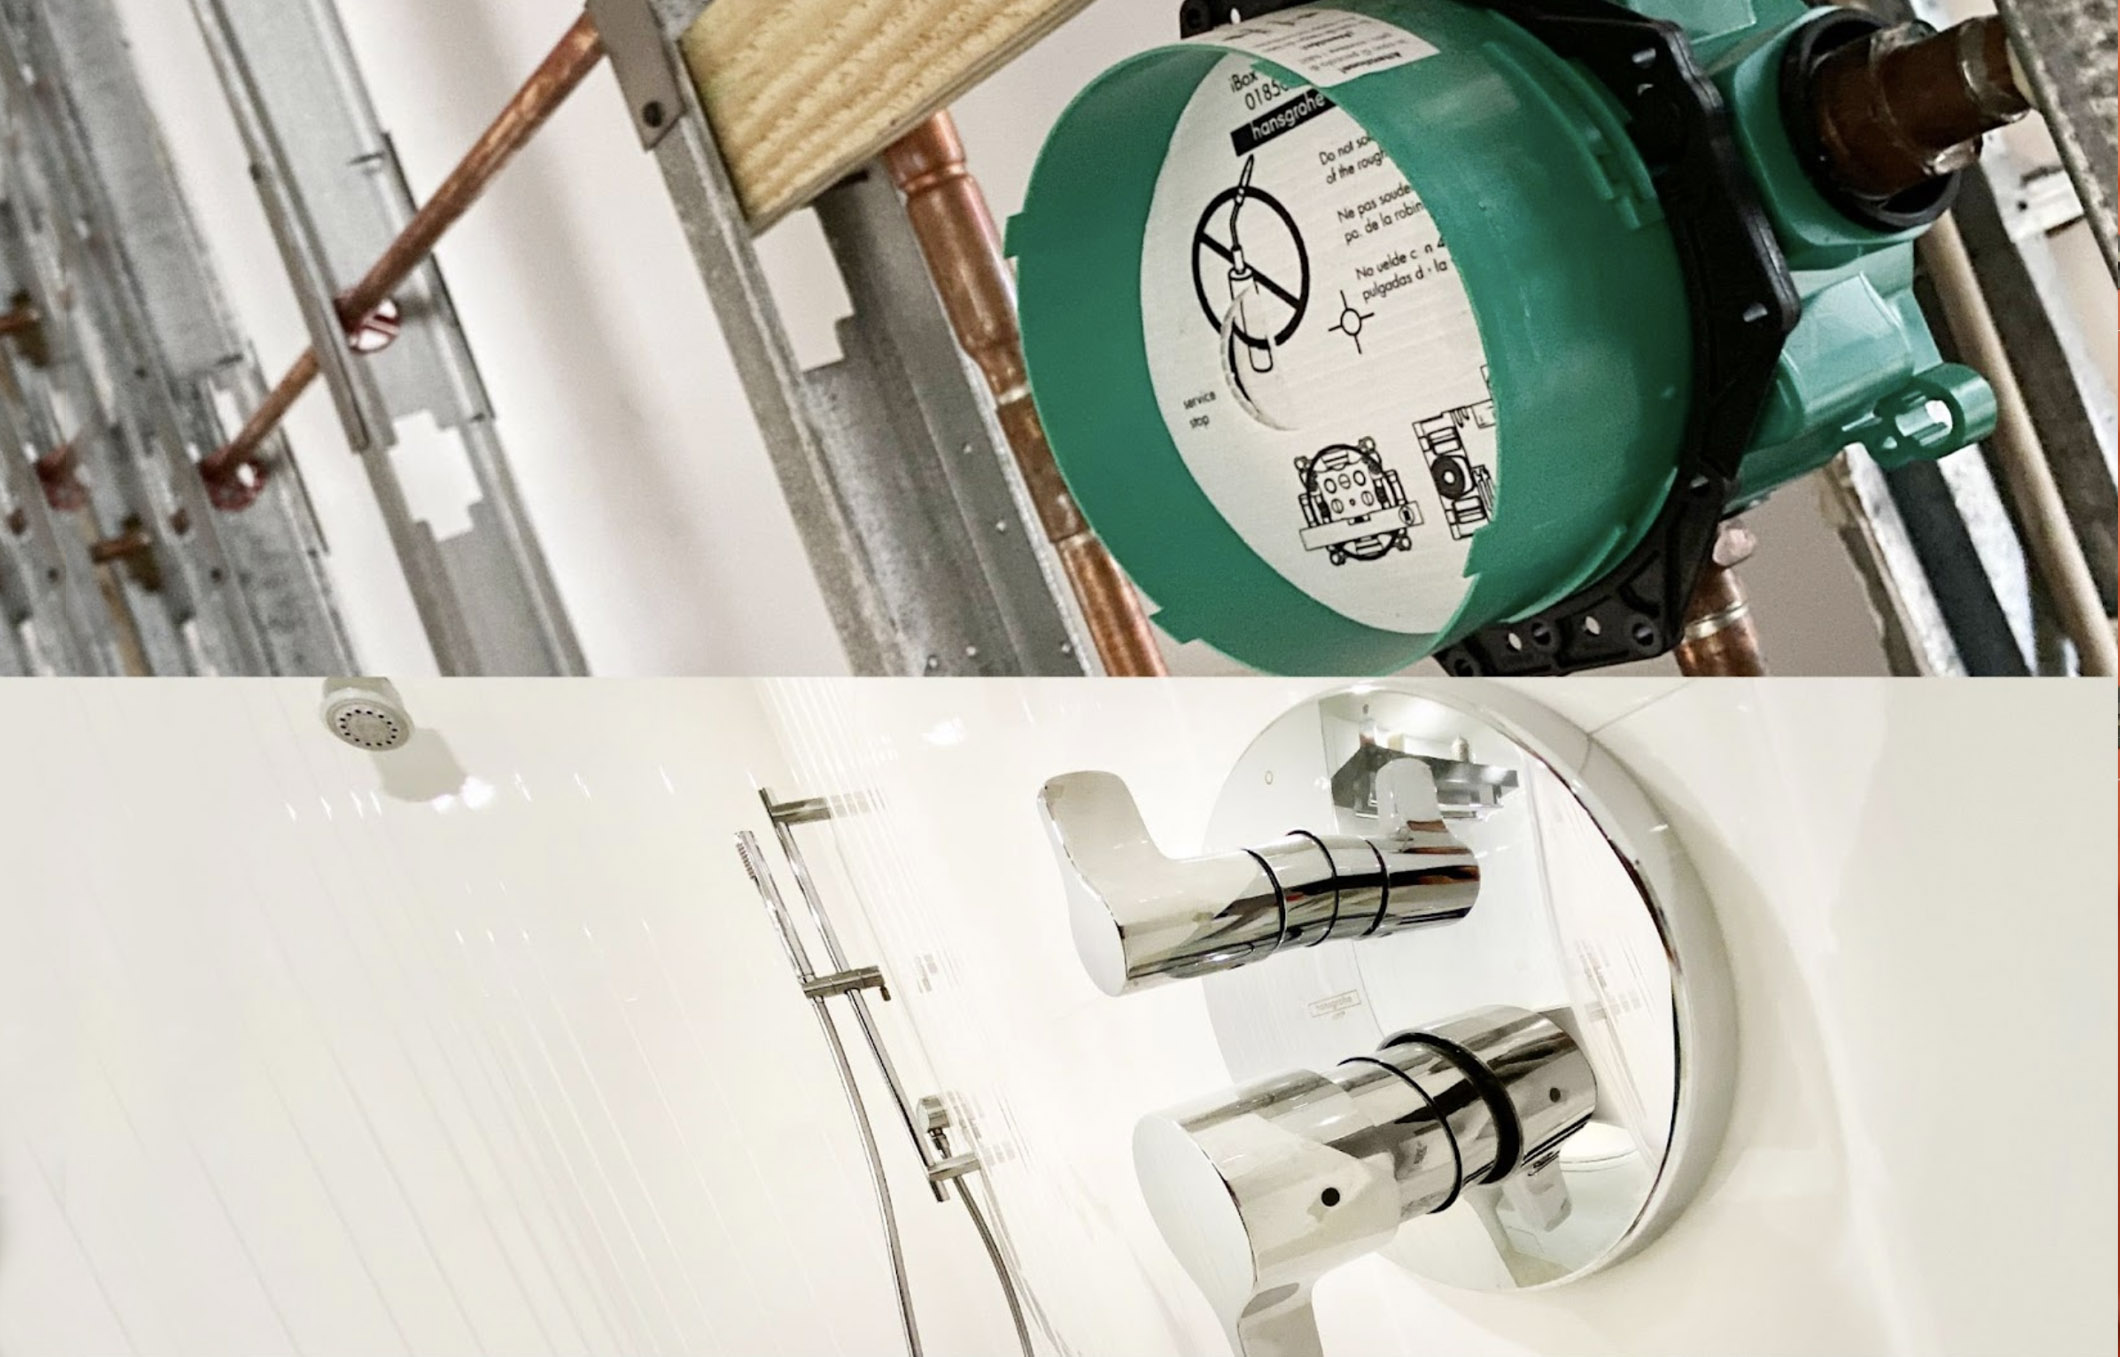 Image showing an under construction bathroom shower thermostatic rough set, as well as the completed shower handle up close.